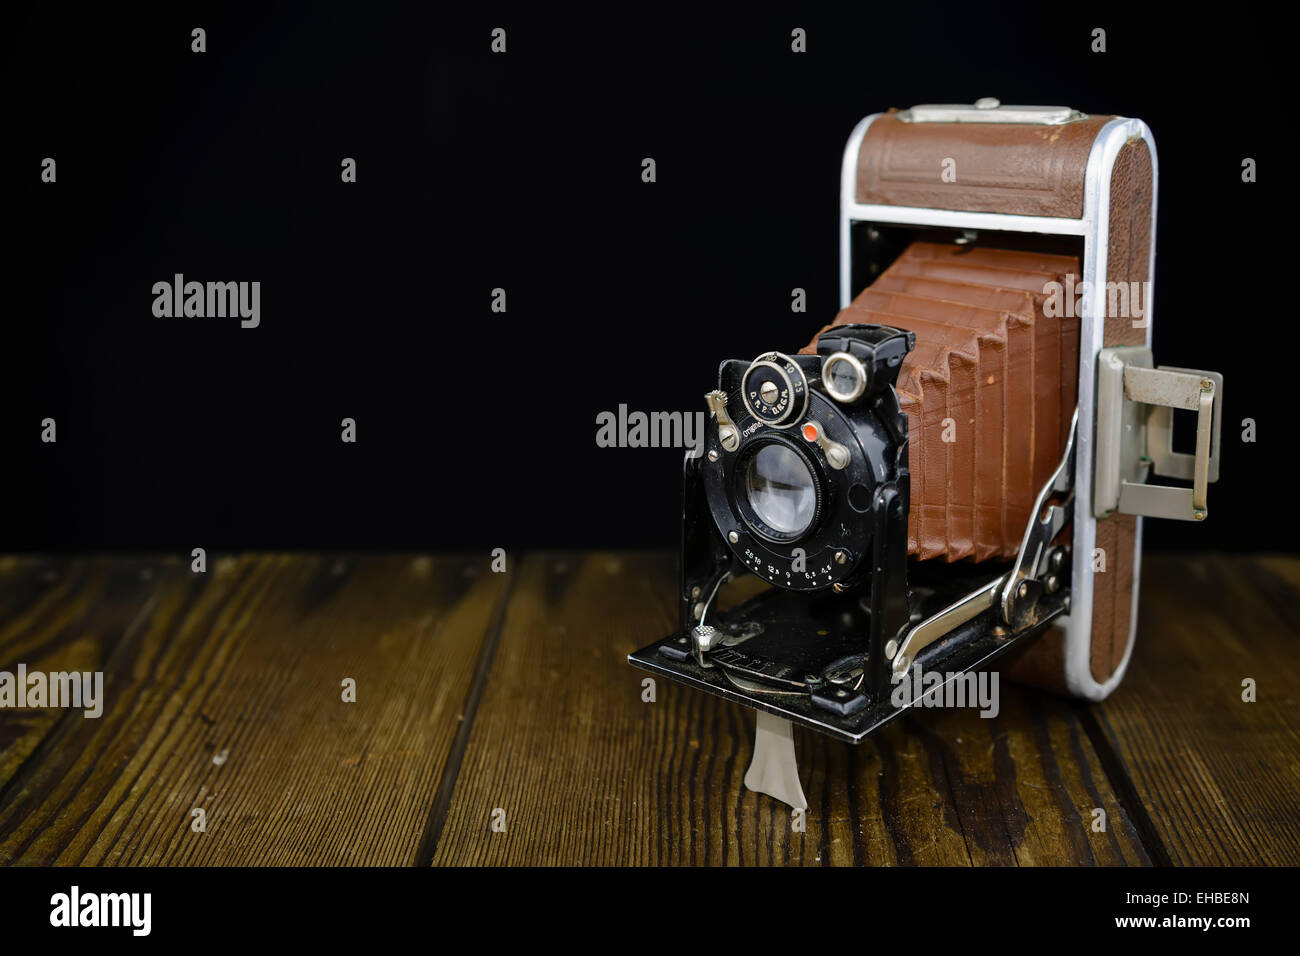 German made vintage camera on wooden board and black background Stock Photo